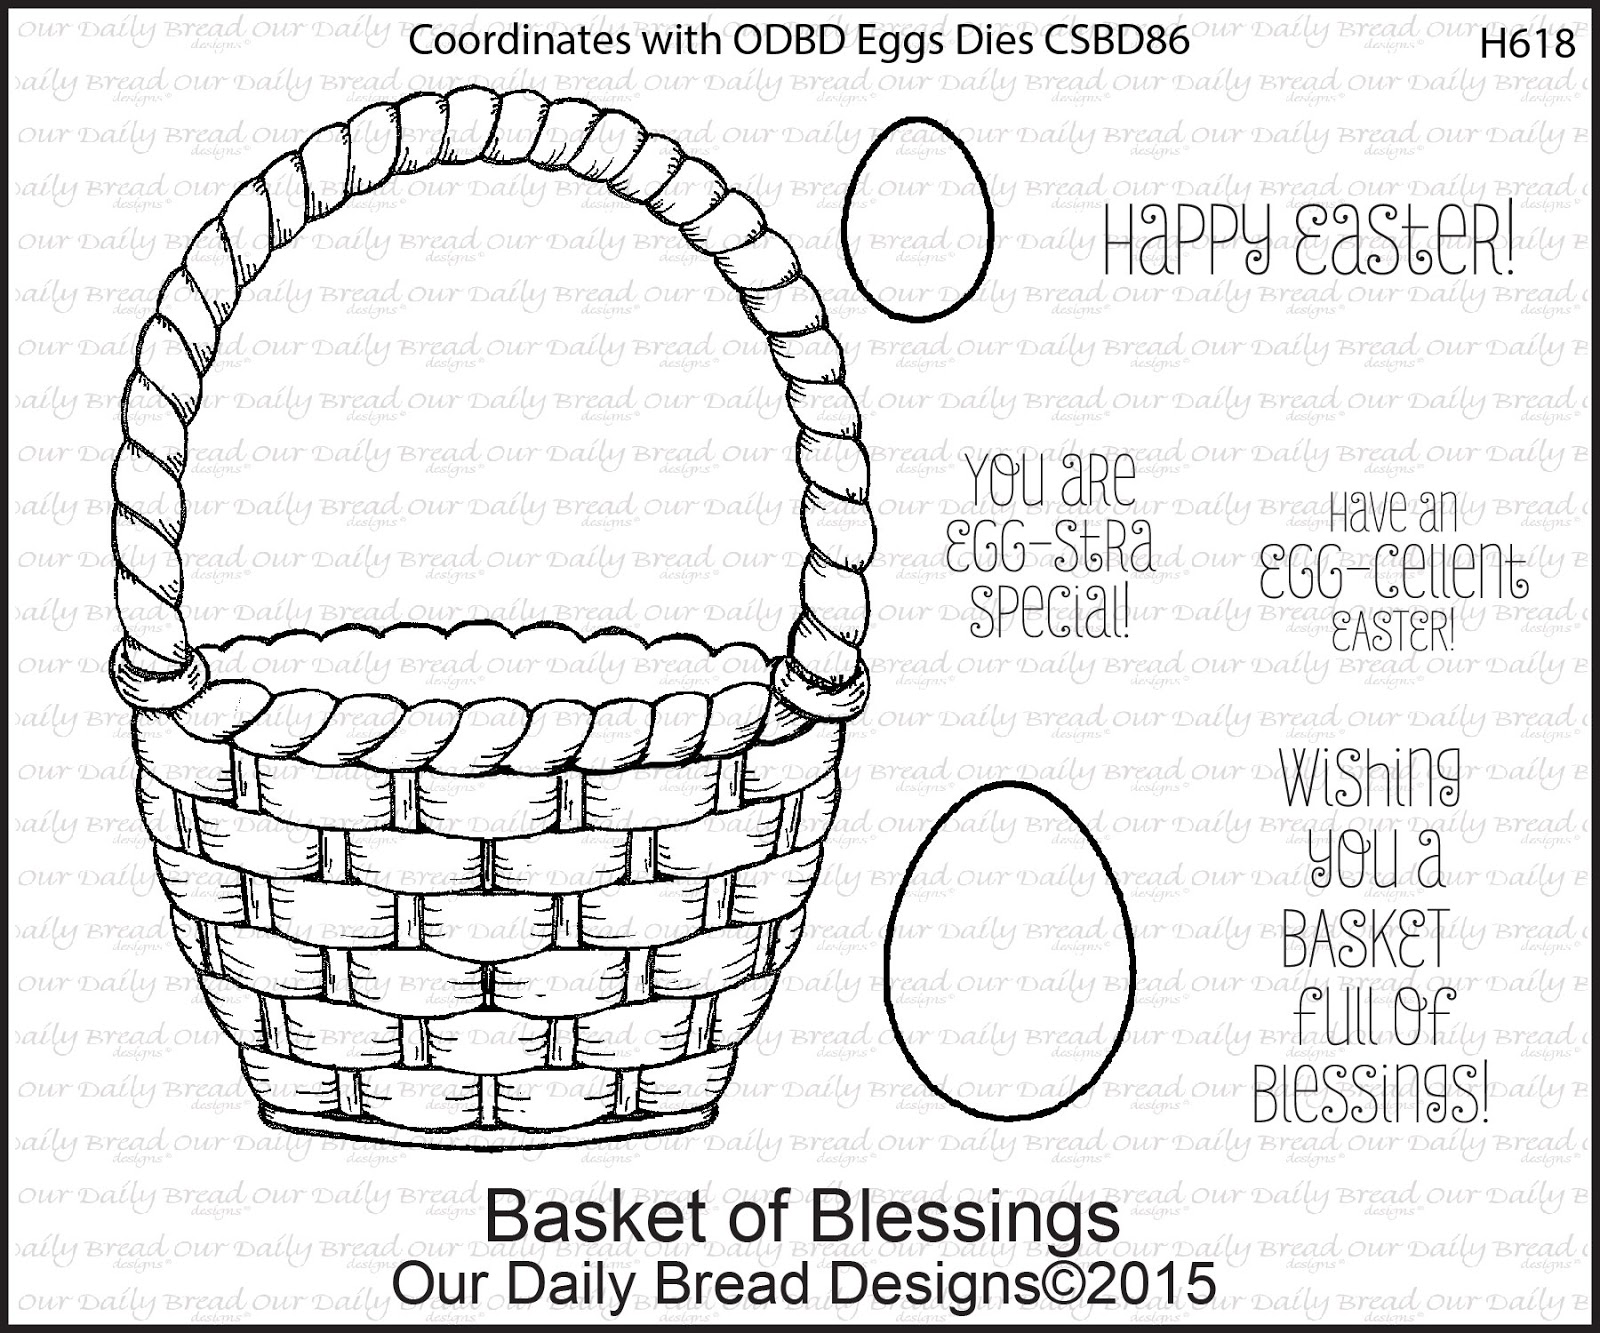 https://www.ourdailybreaddesigns.com/index.php/h618-basket-of-blessings.html